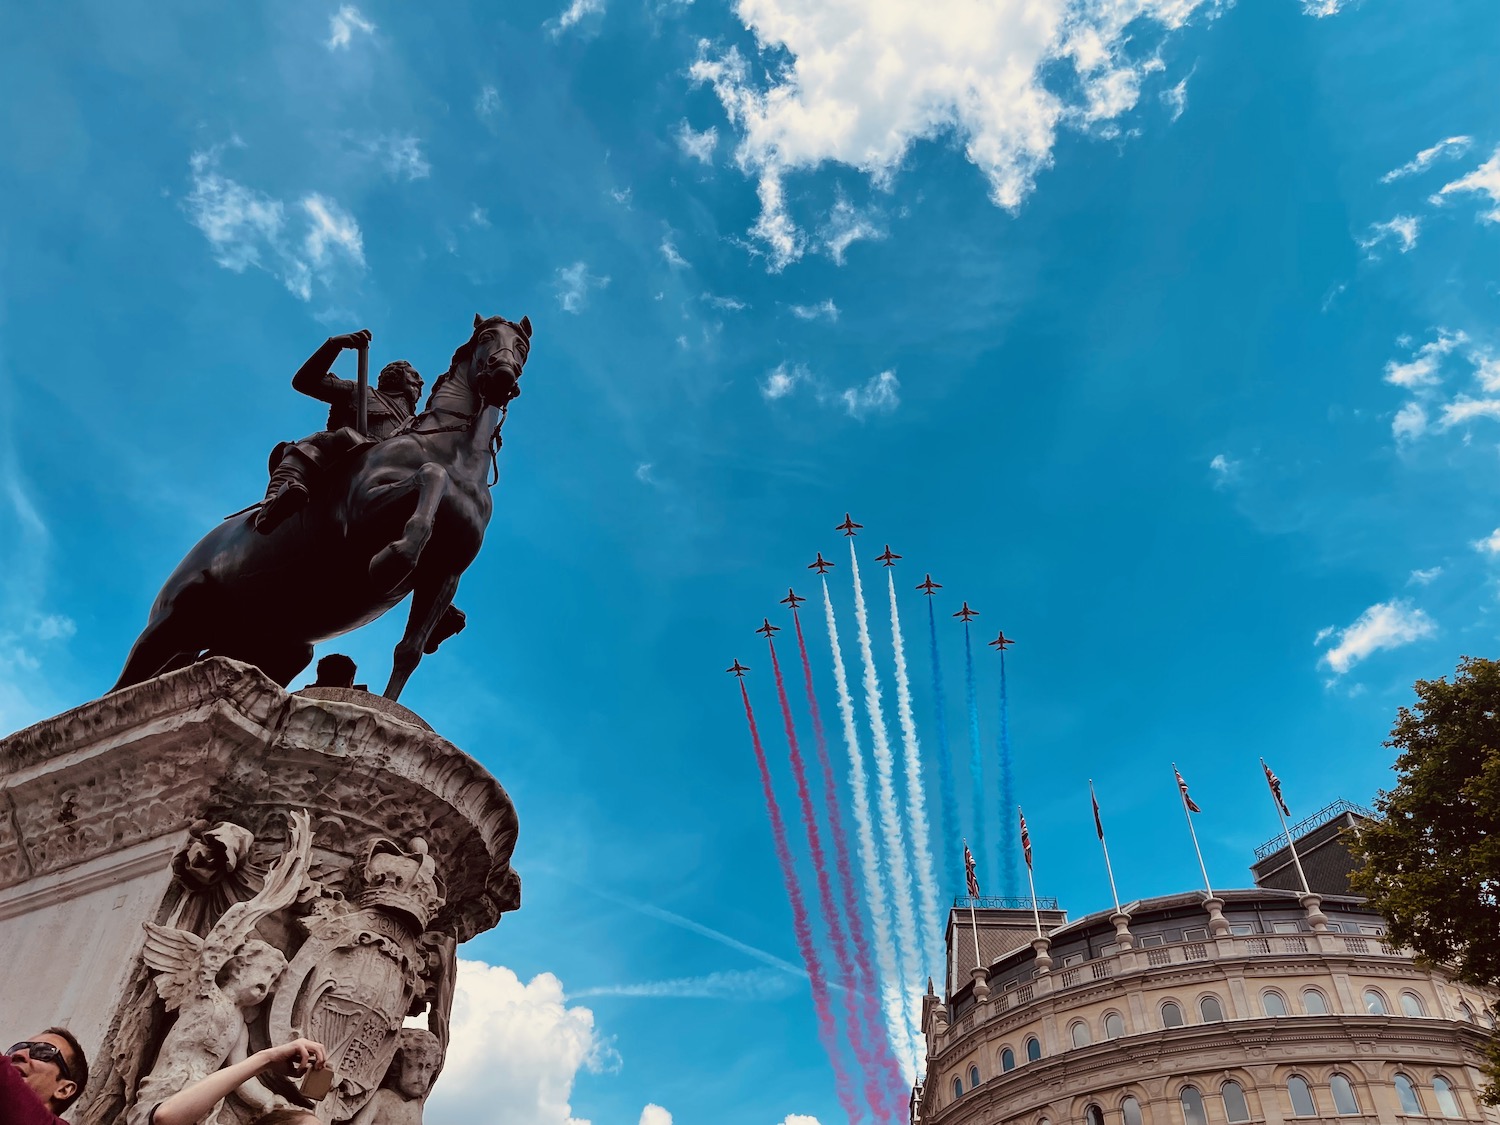 a statue of a man on a horse with red white and blue jets flying in the sky